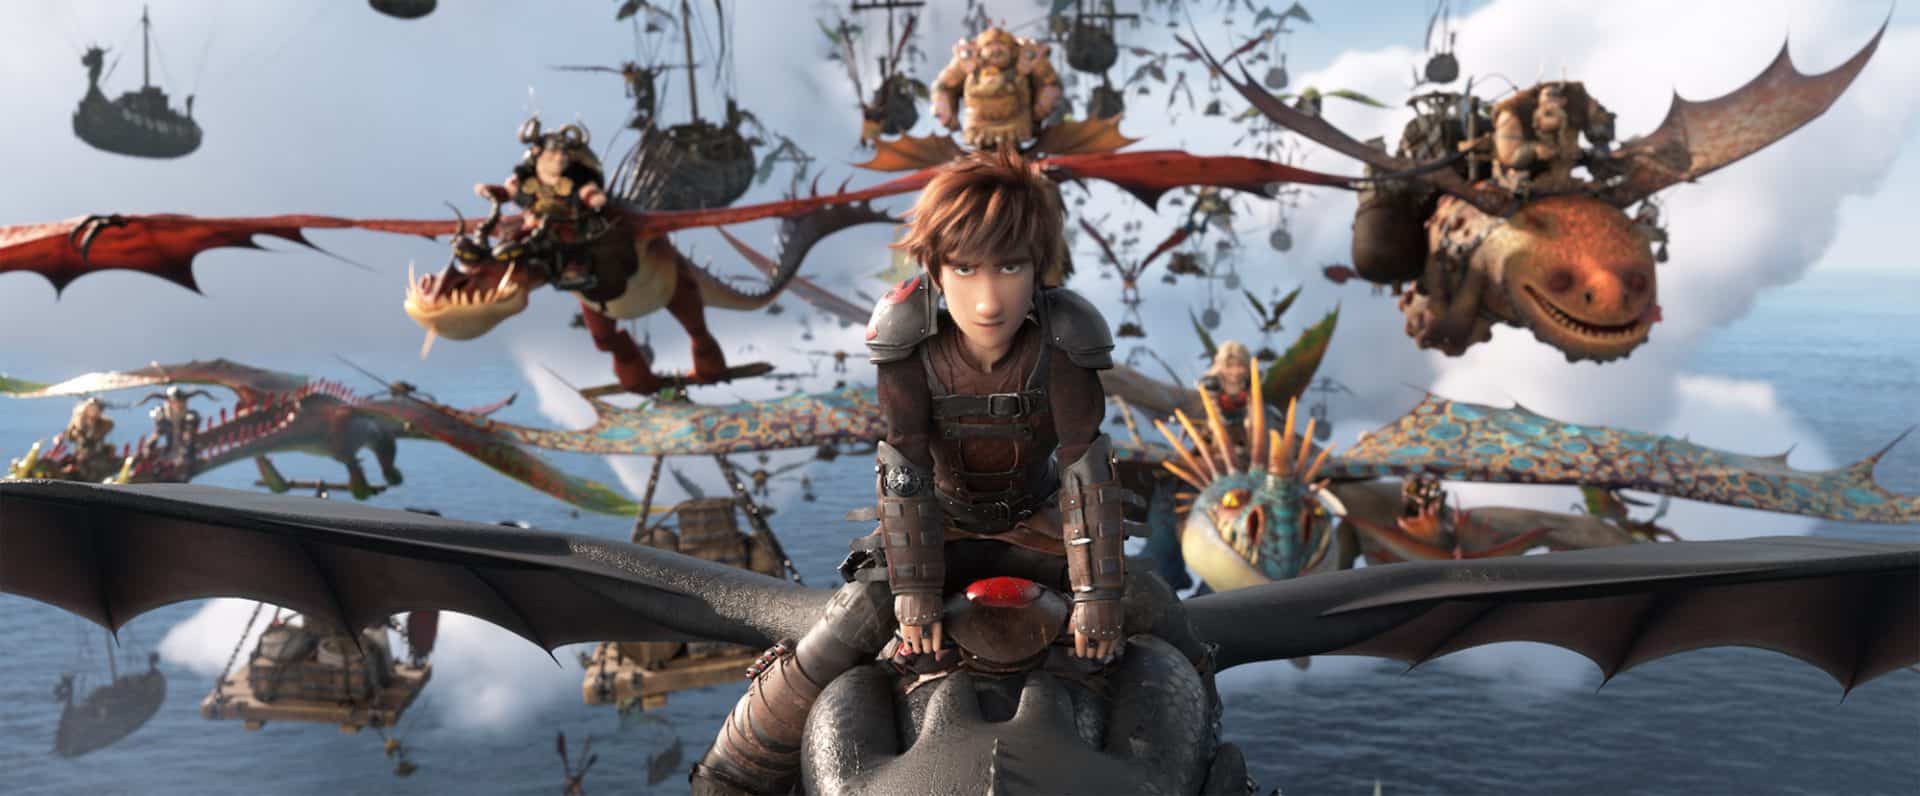 How to Train Your Dragon 3: The Hidden World